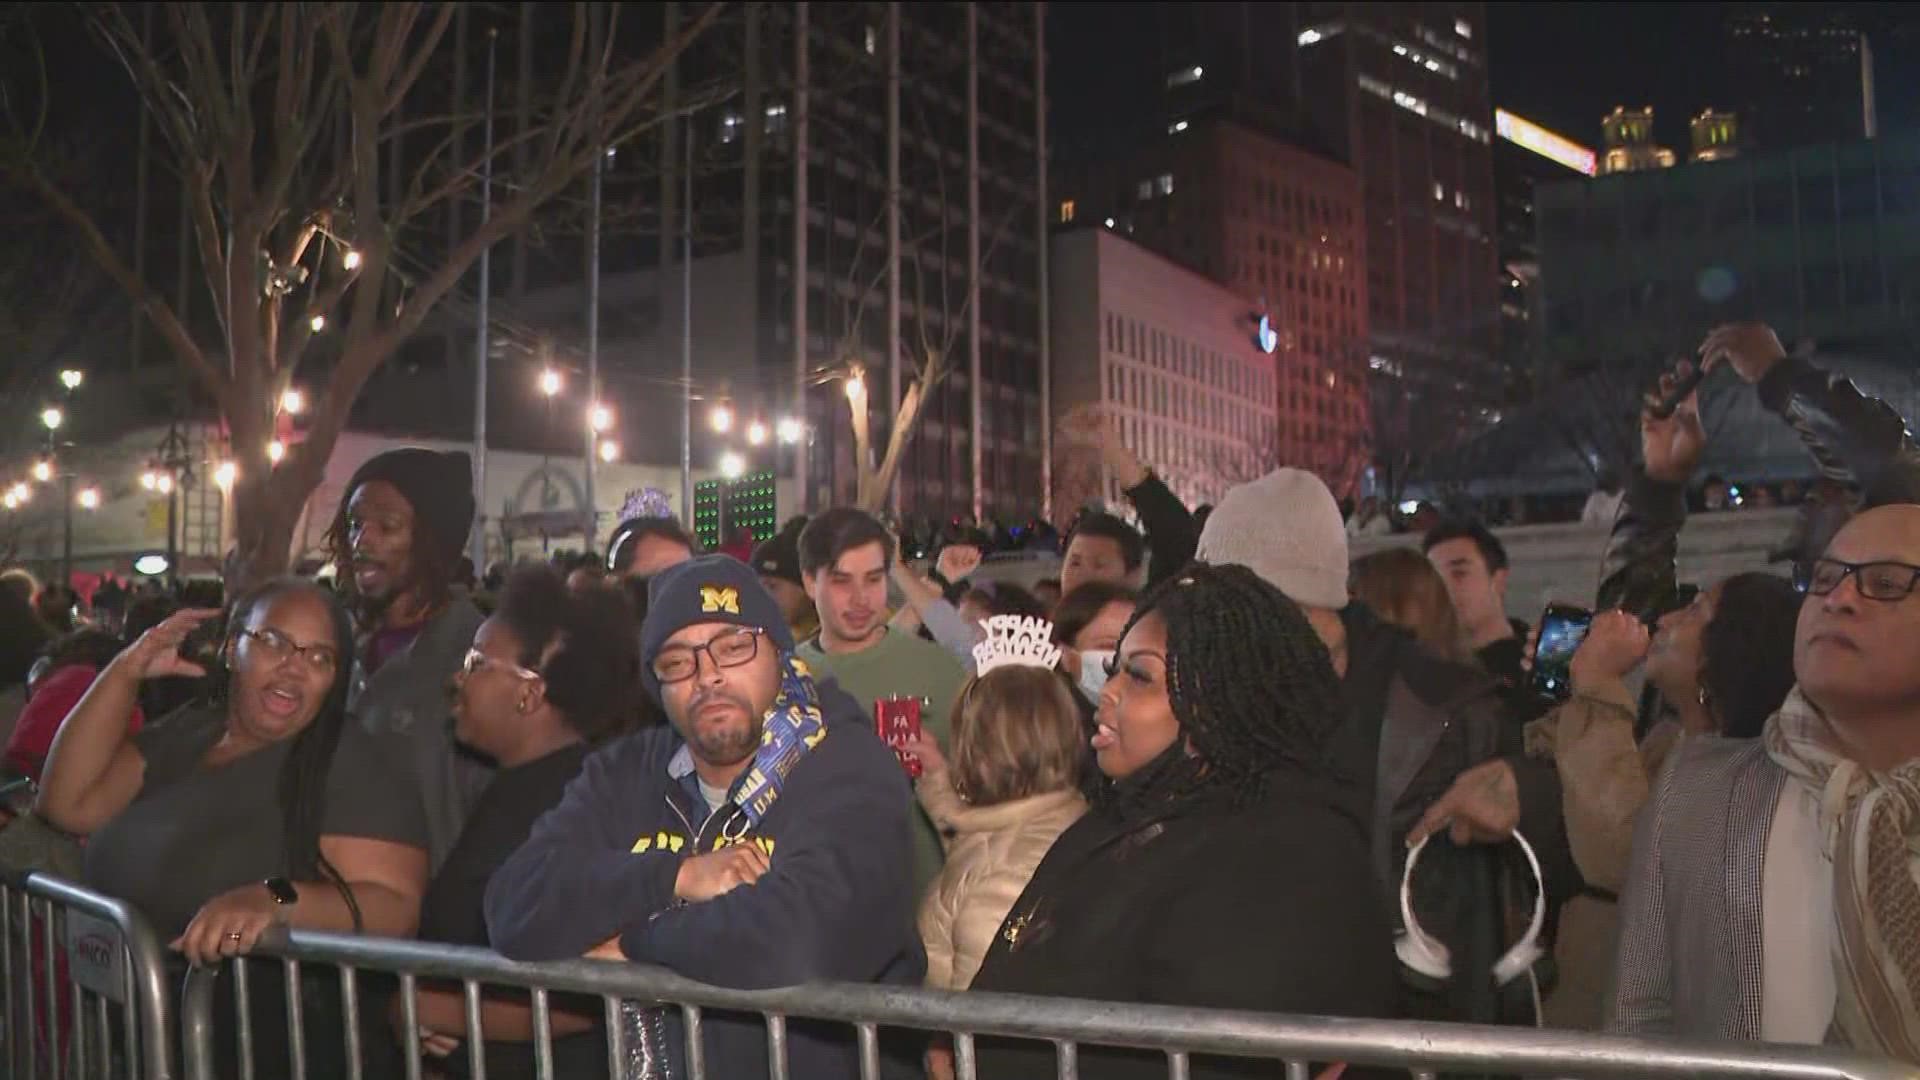 Less than two hours before the Peach Drop, thousands showed up to Underground Atlanta, to celebrate the new year with music and food.